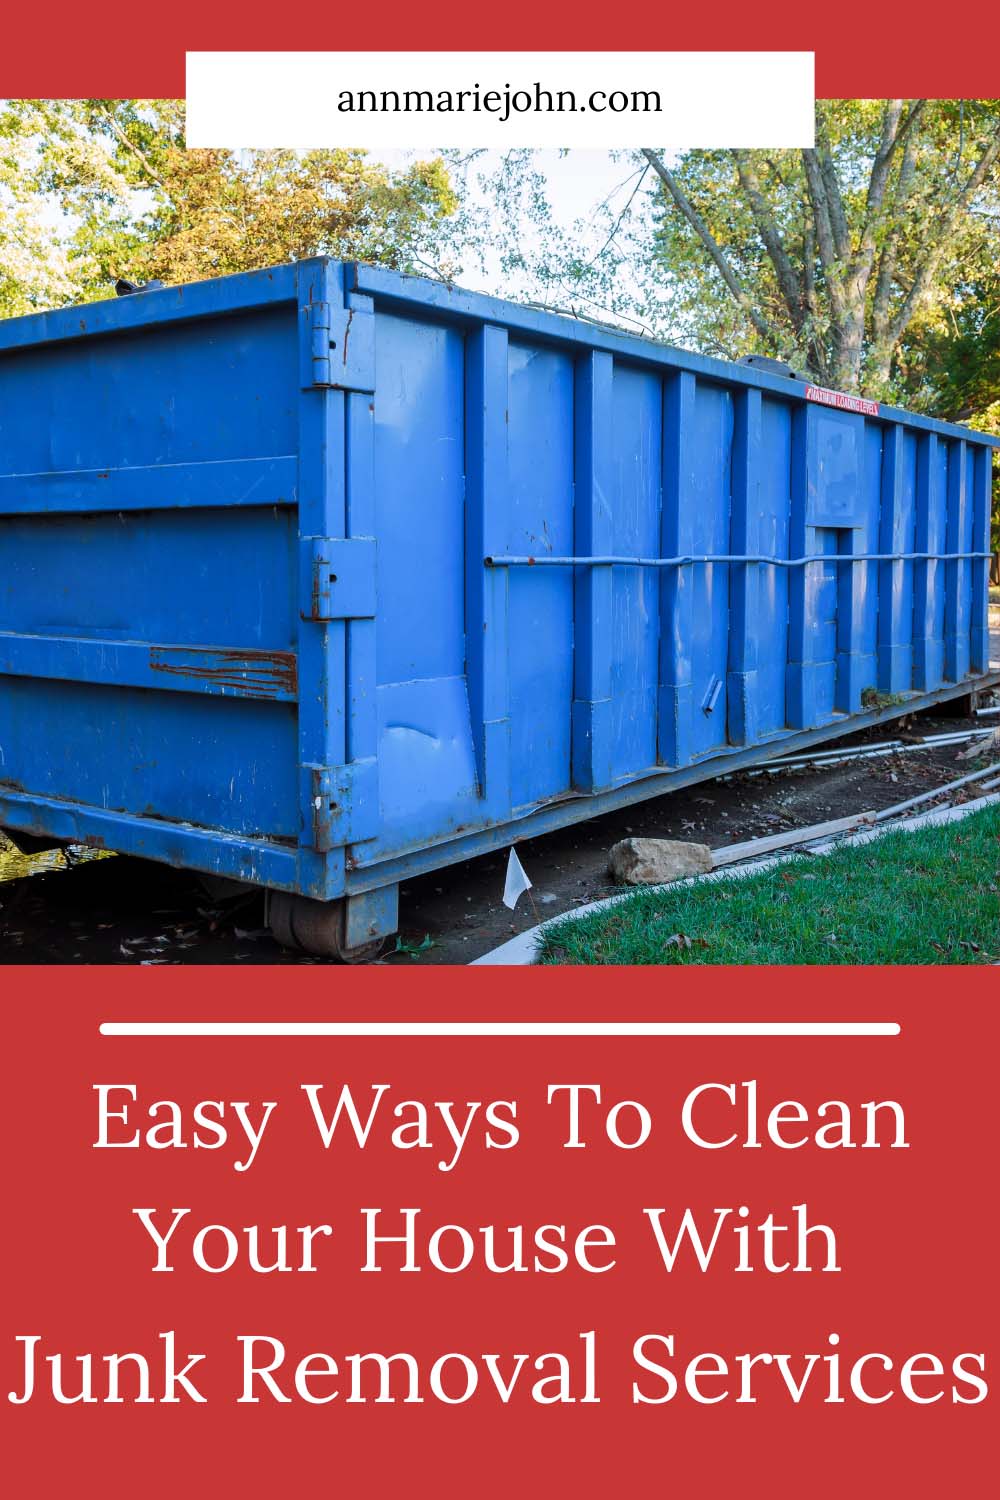 Easy Ways To Clean Your House With Junk Removal Services